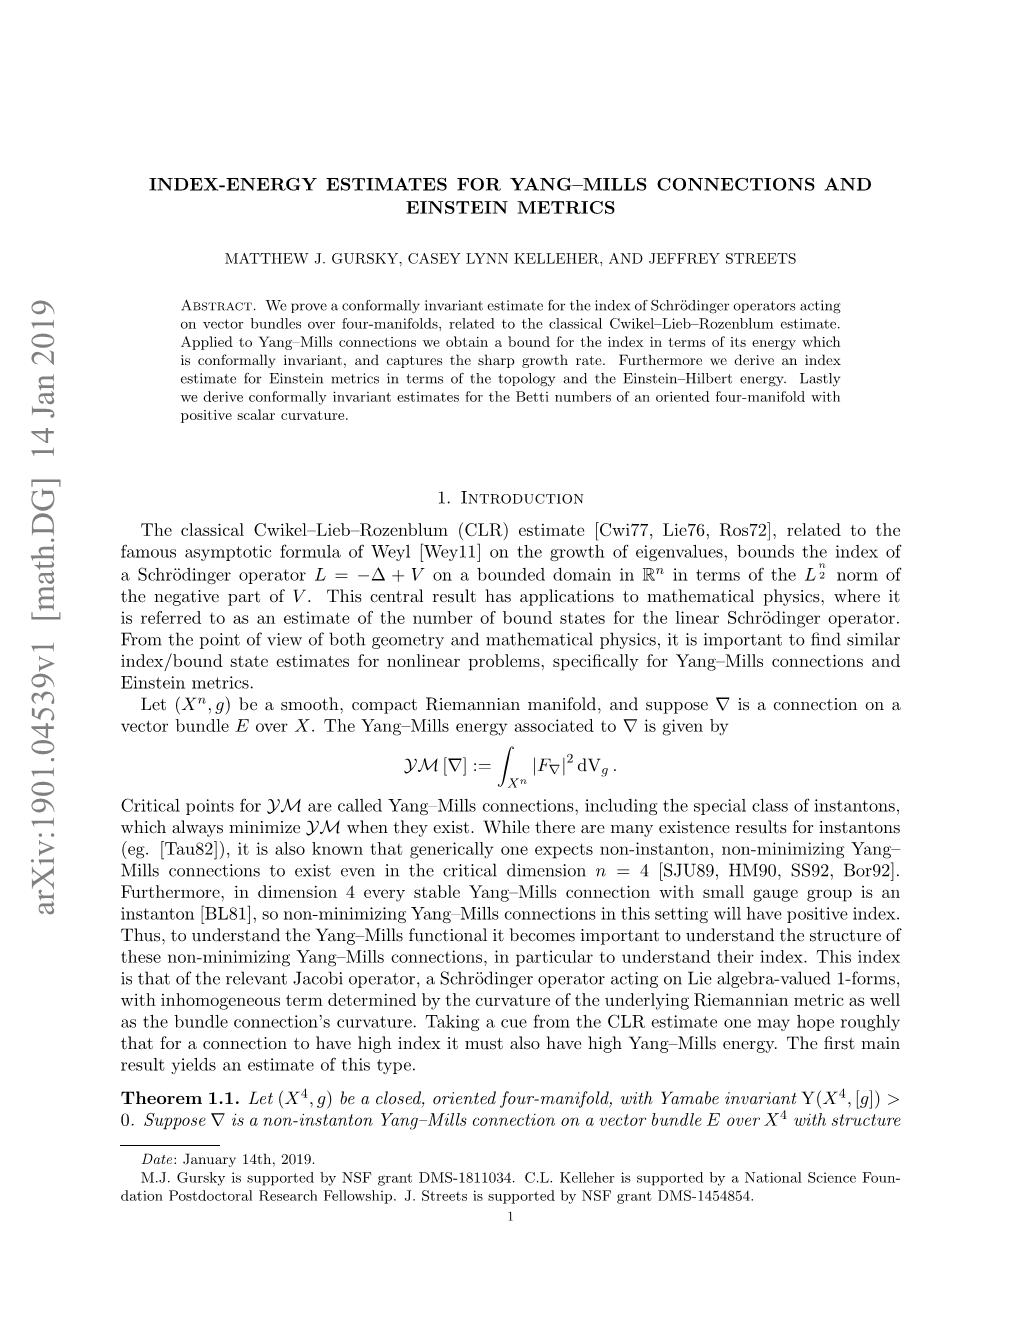 Index-Energy Estimates for Yang-Mills Connections and Einstein Metrics